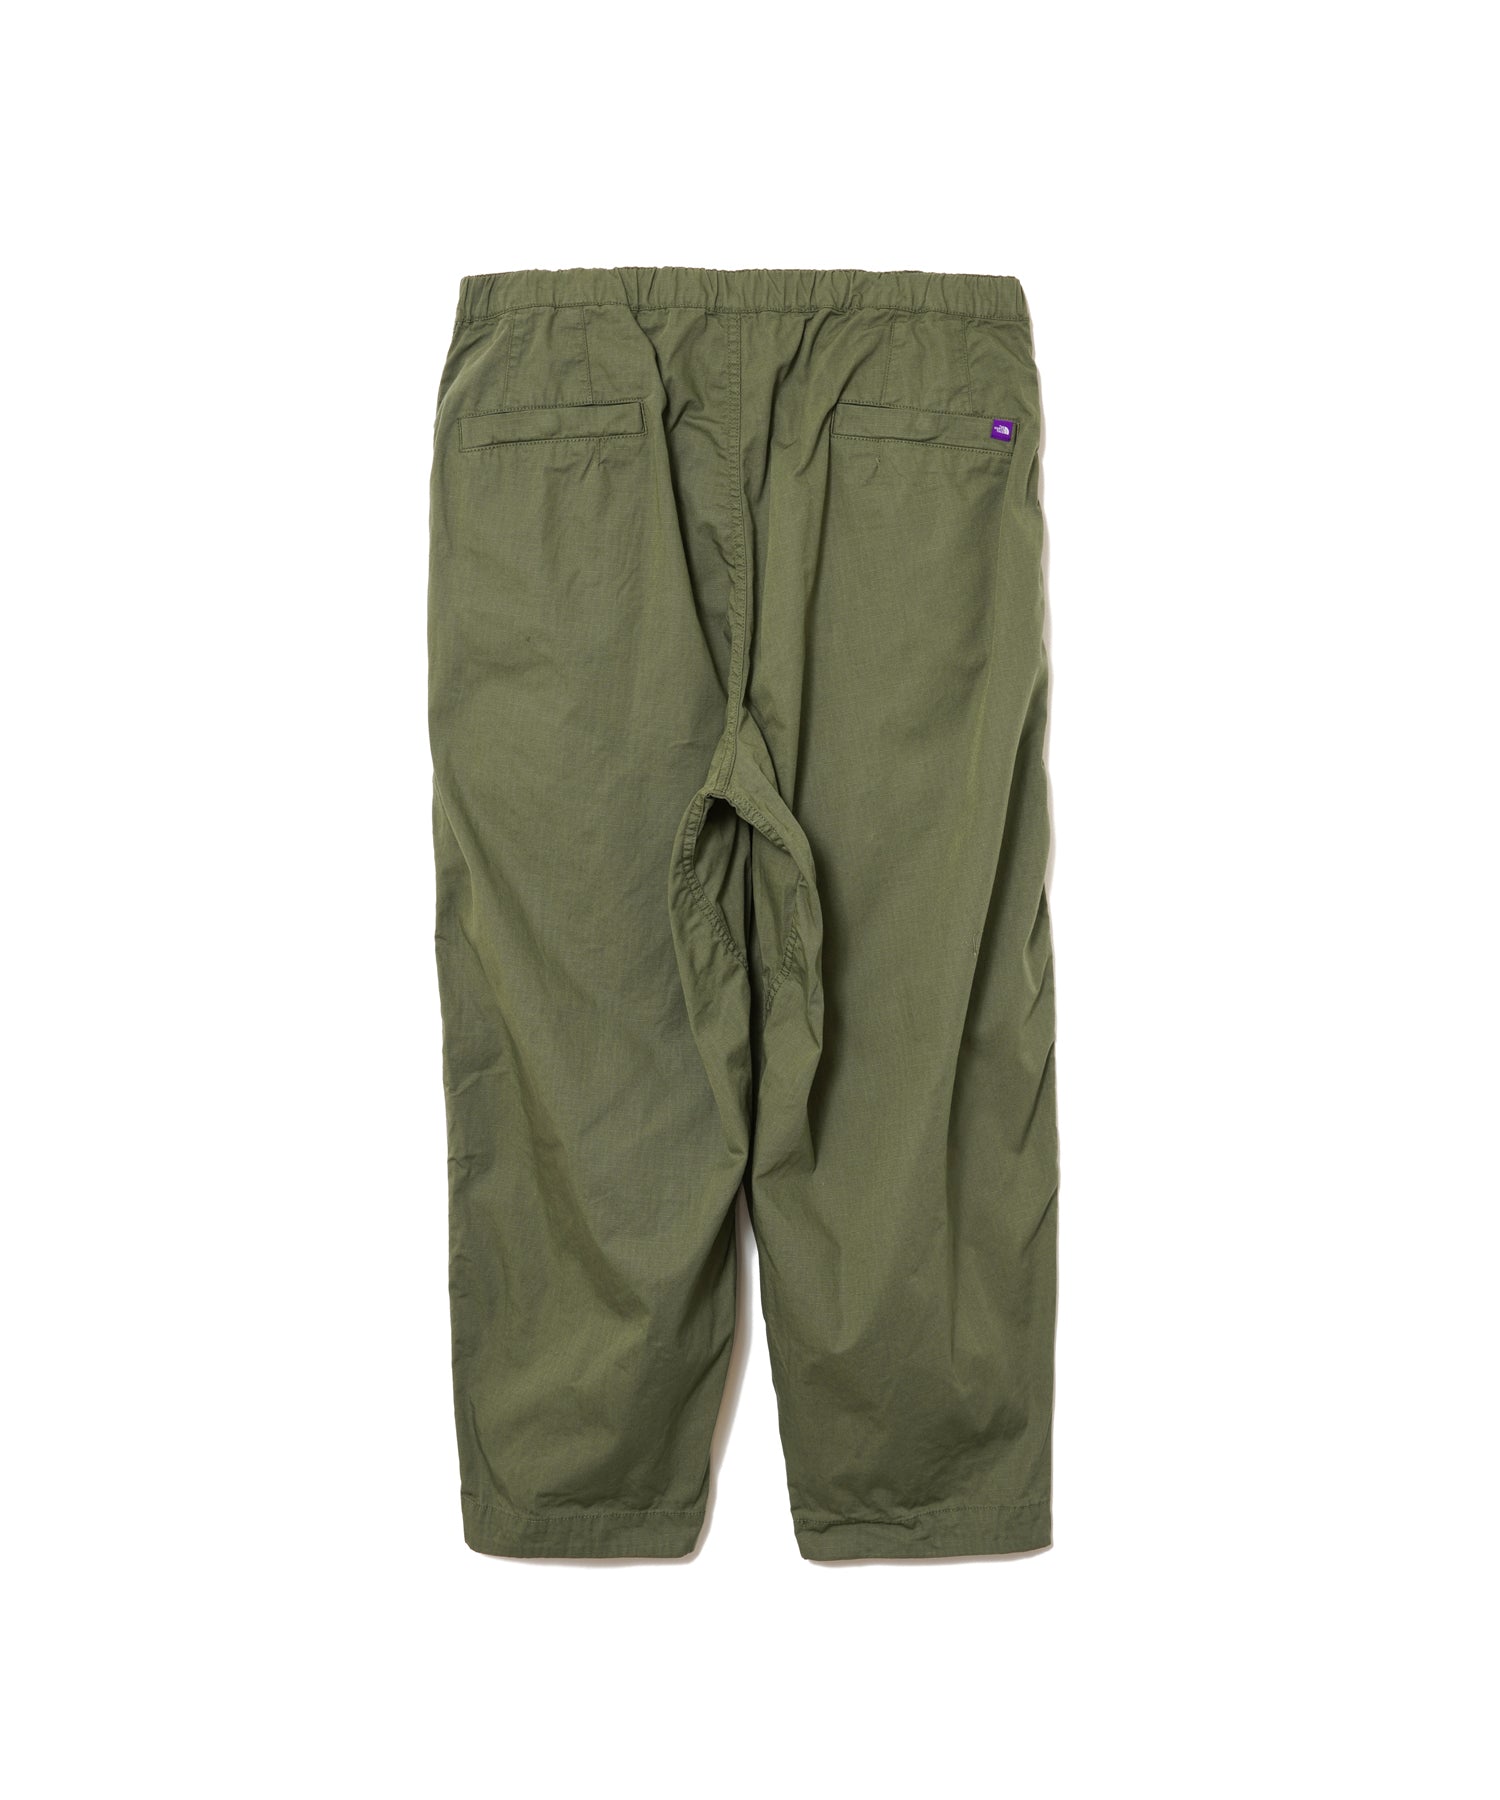 MEN】THE NORTH FACE PURPLE LABEL Ripstop Wide Cropped Field Pants 